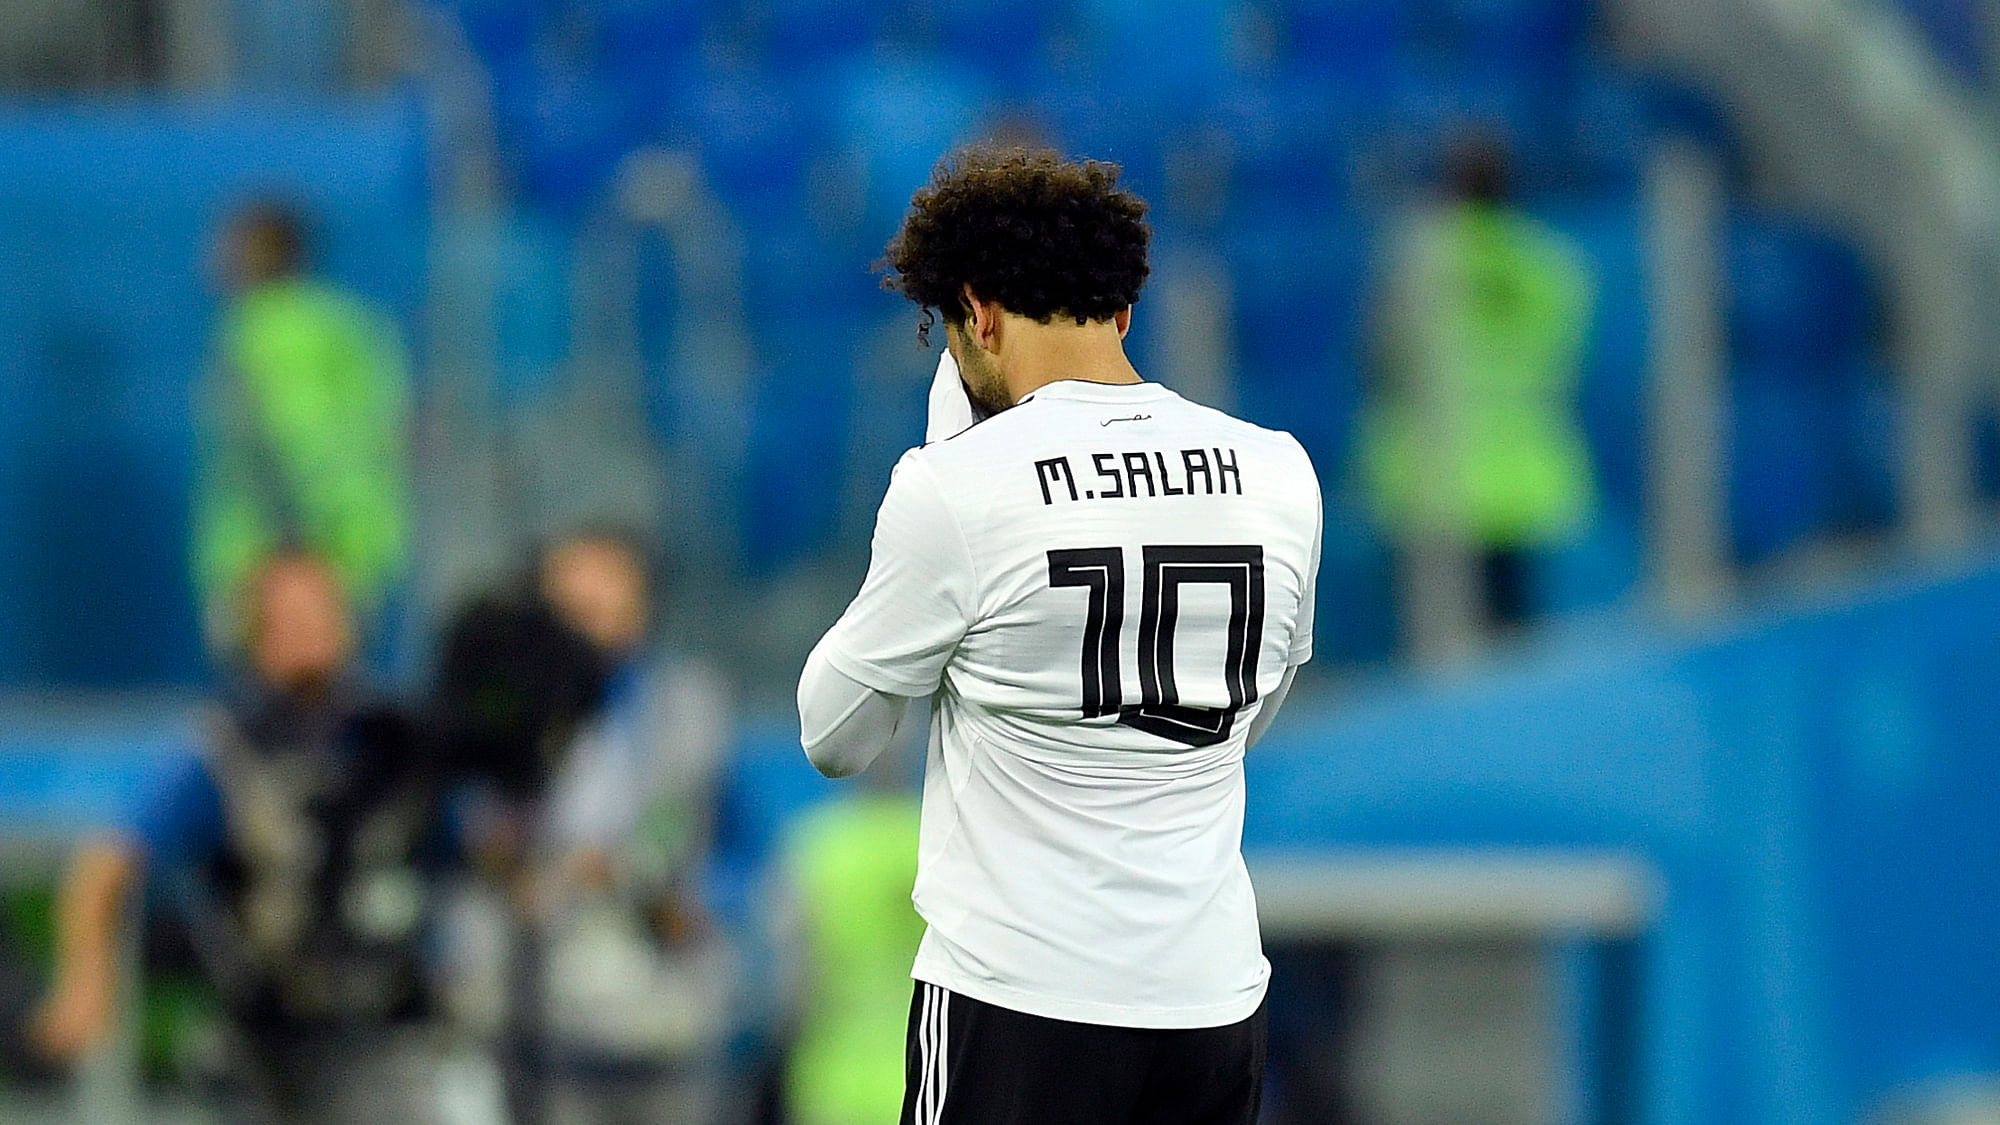 After sitting out of Egypt’s opening fixture, Mo Salah made his 2018 FIFA World Cup debut against hosts Russia on Tuesday night.